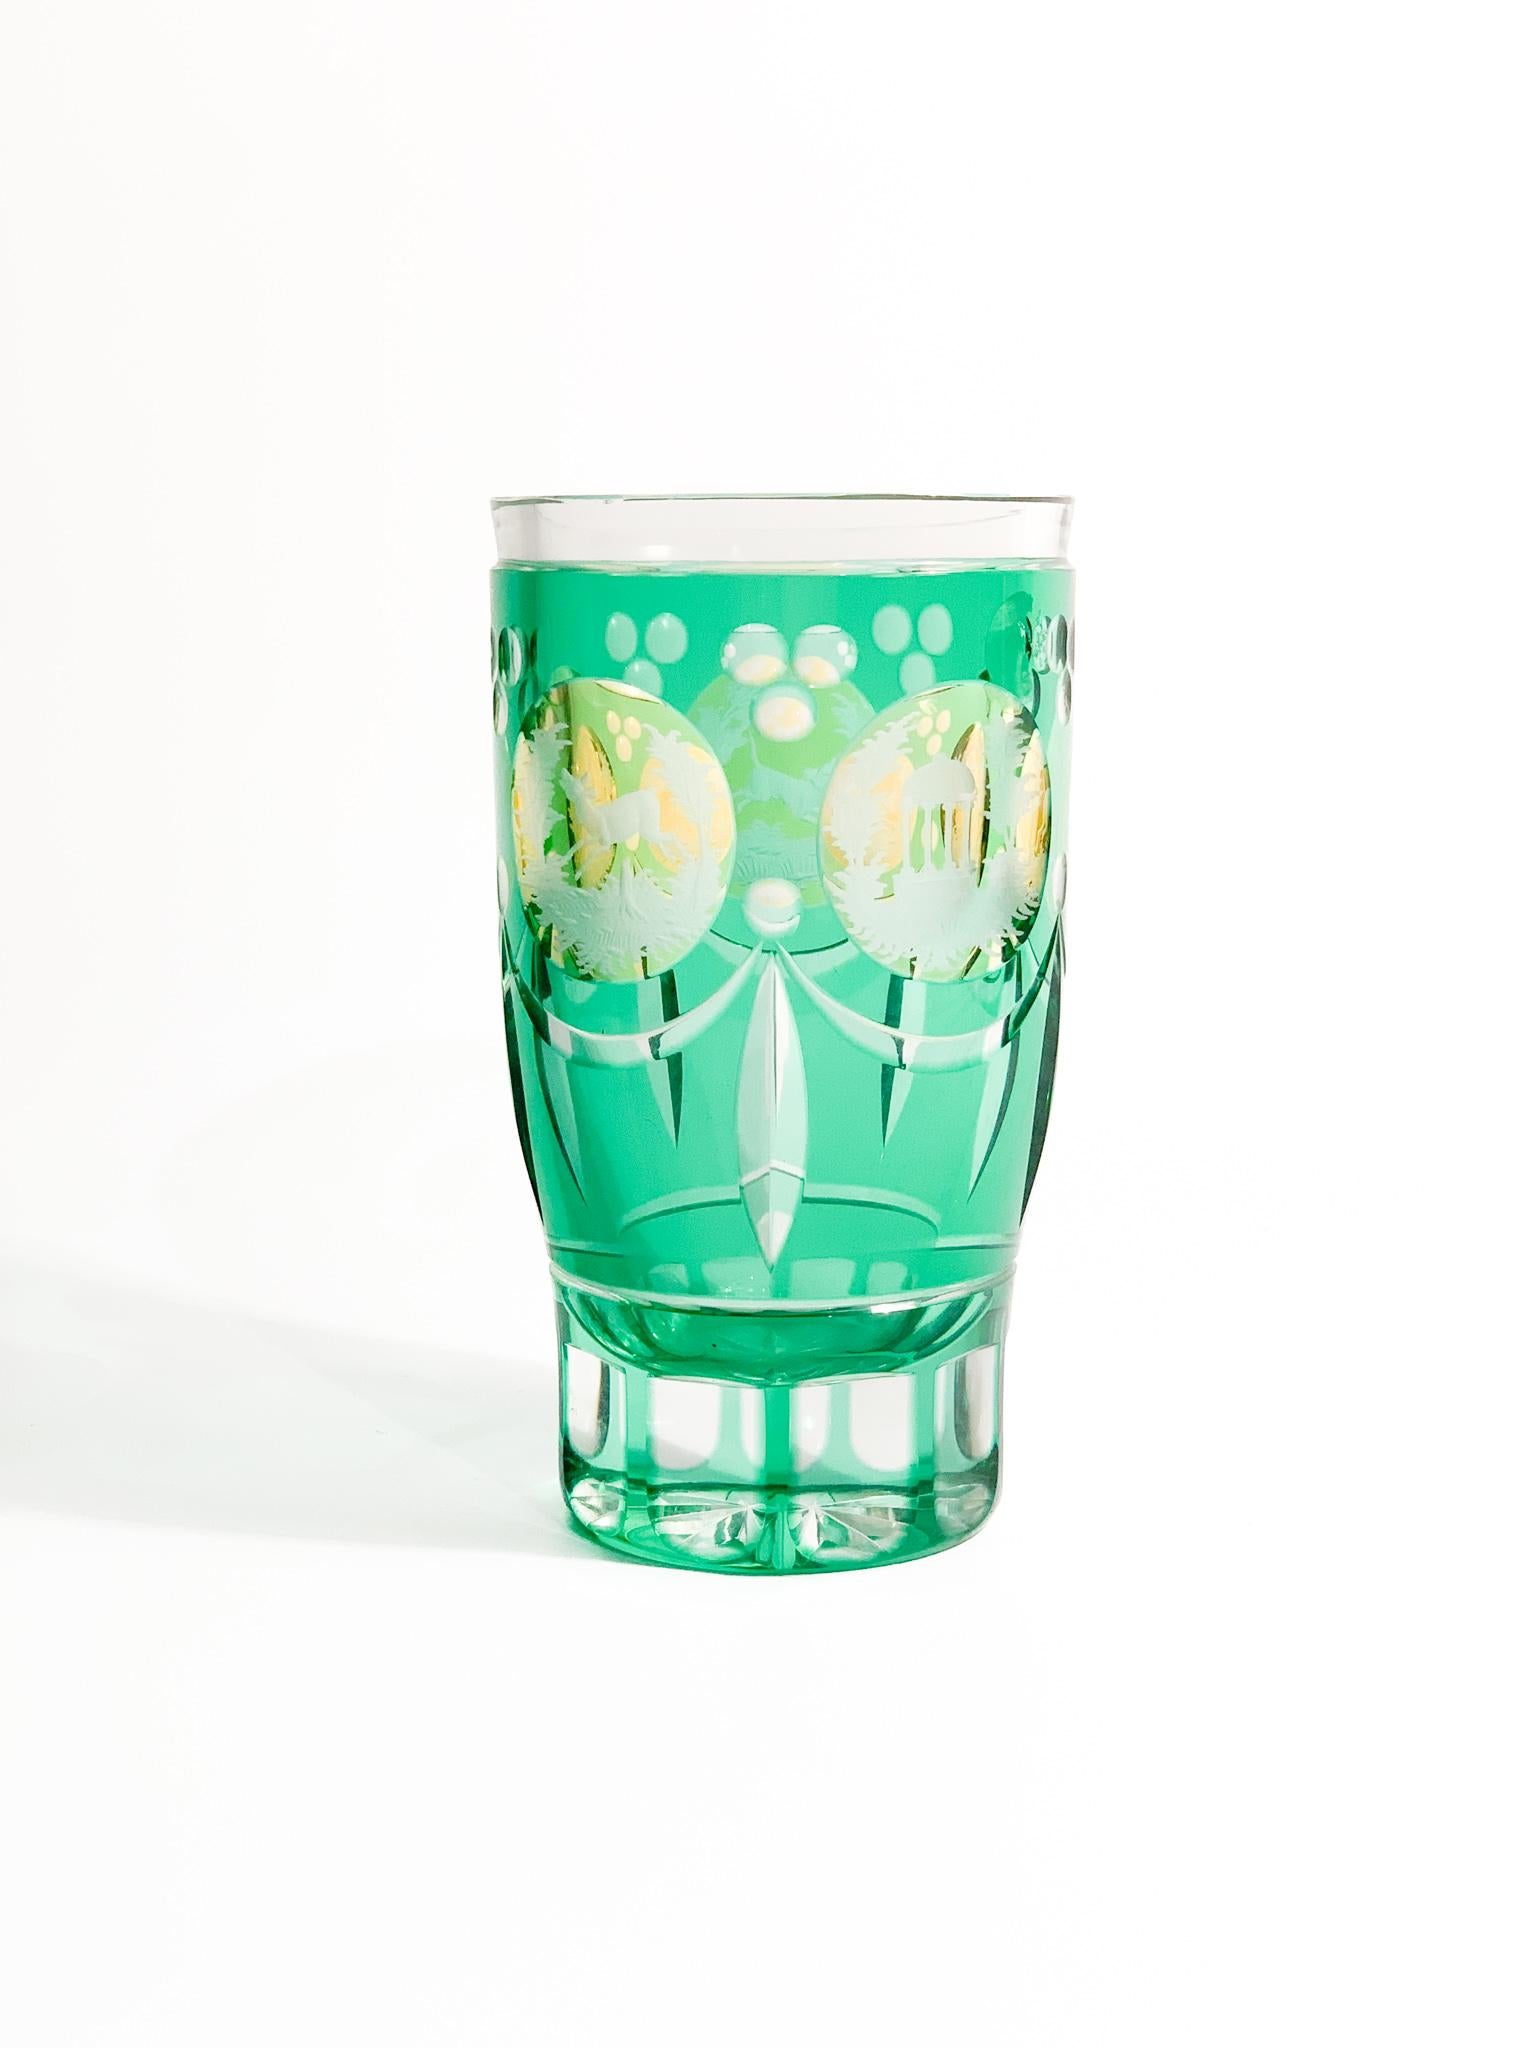 Green and yellow Biedermeier crystal glass, acid decorated and made in 1800

Ø cm 8 h cm 15

Biedermeier is was an artistic movement that developed between 1815 and 1848. The term initially spread as a derogatory term. Consisting of two words: the